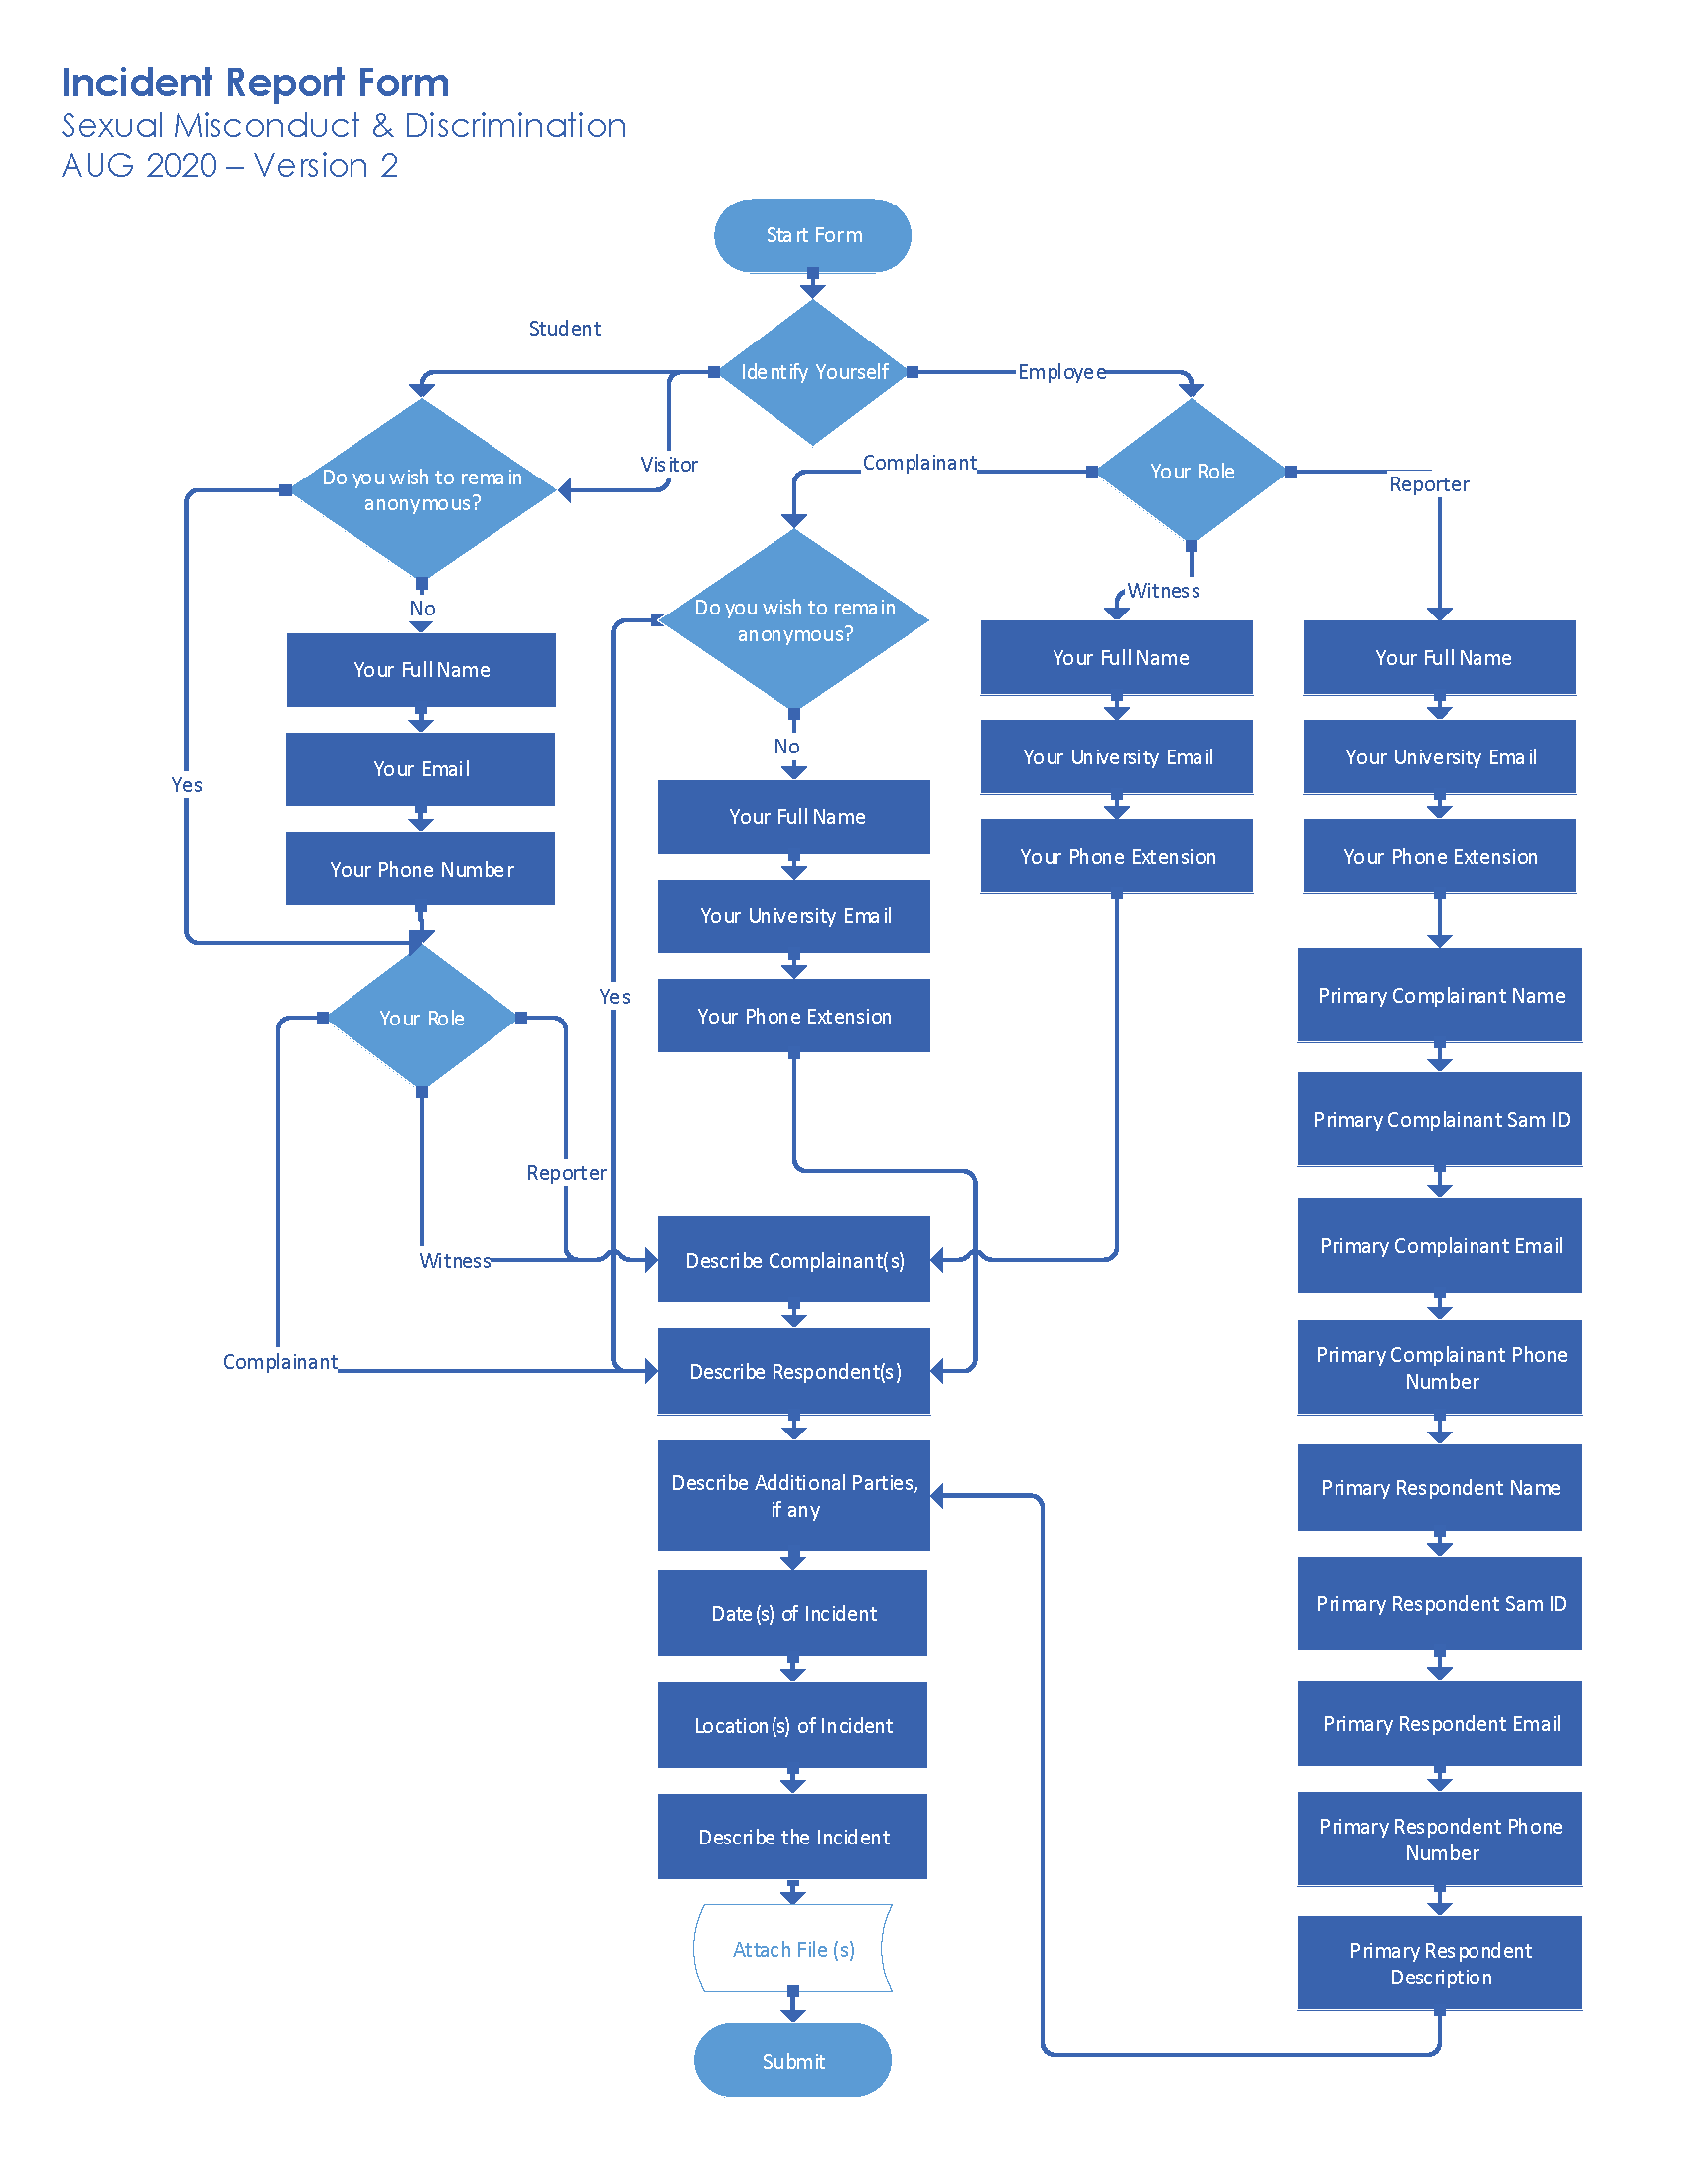 workflow chart featuring blue arrows and shapes